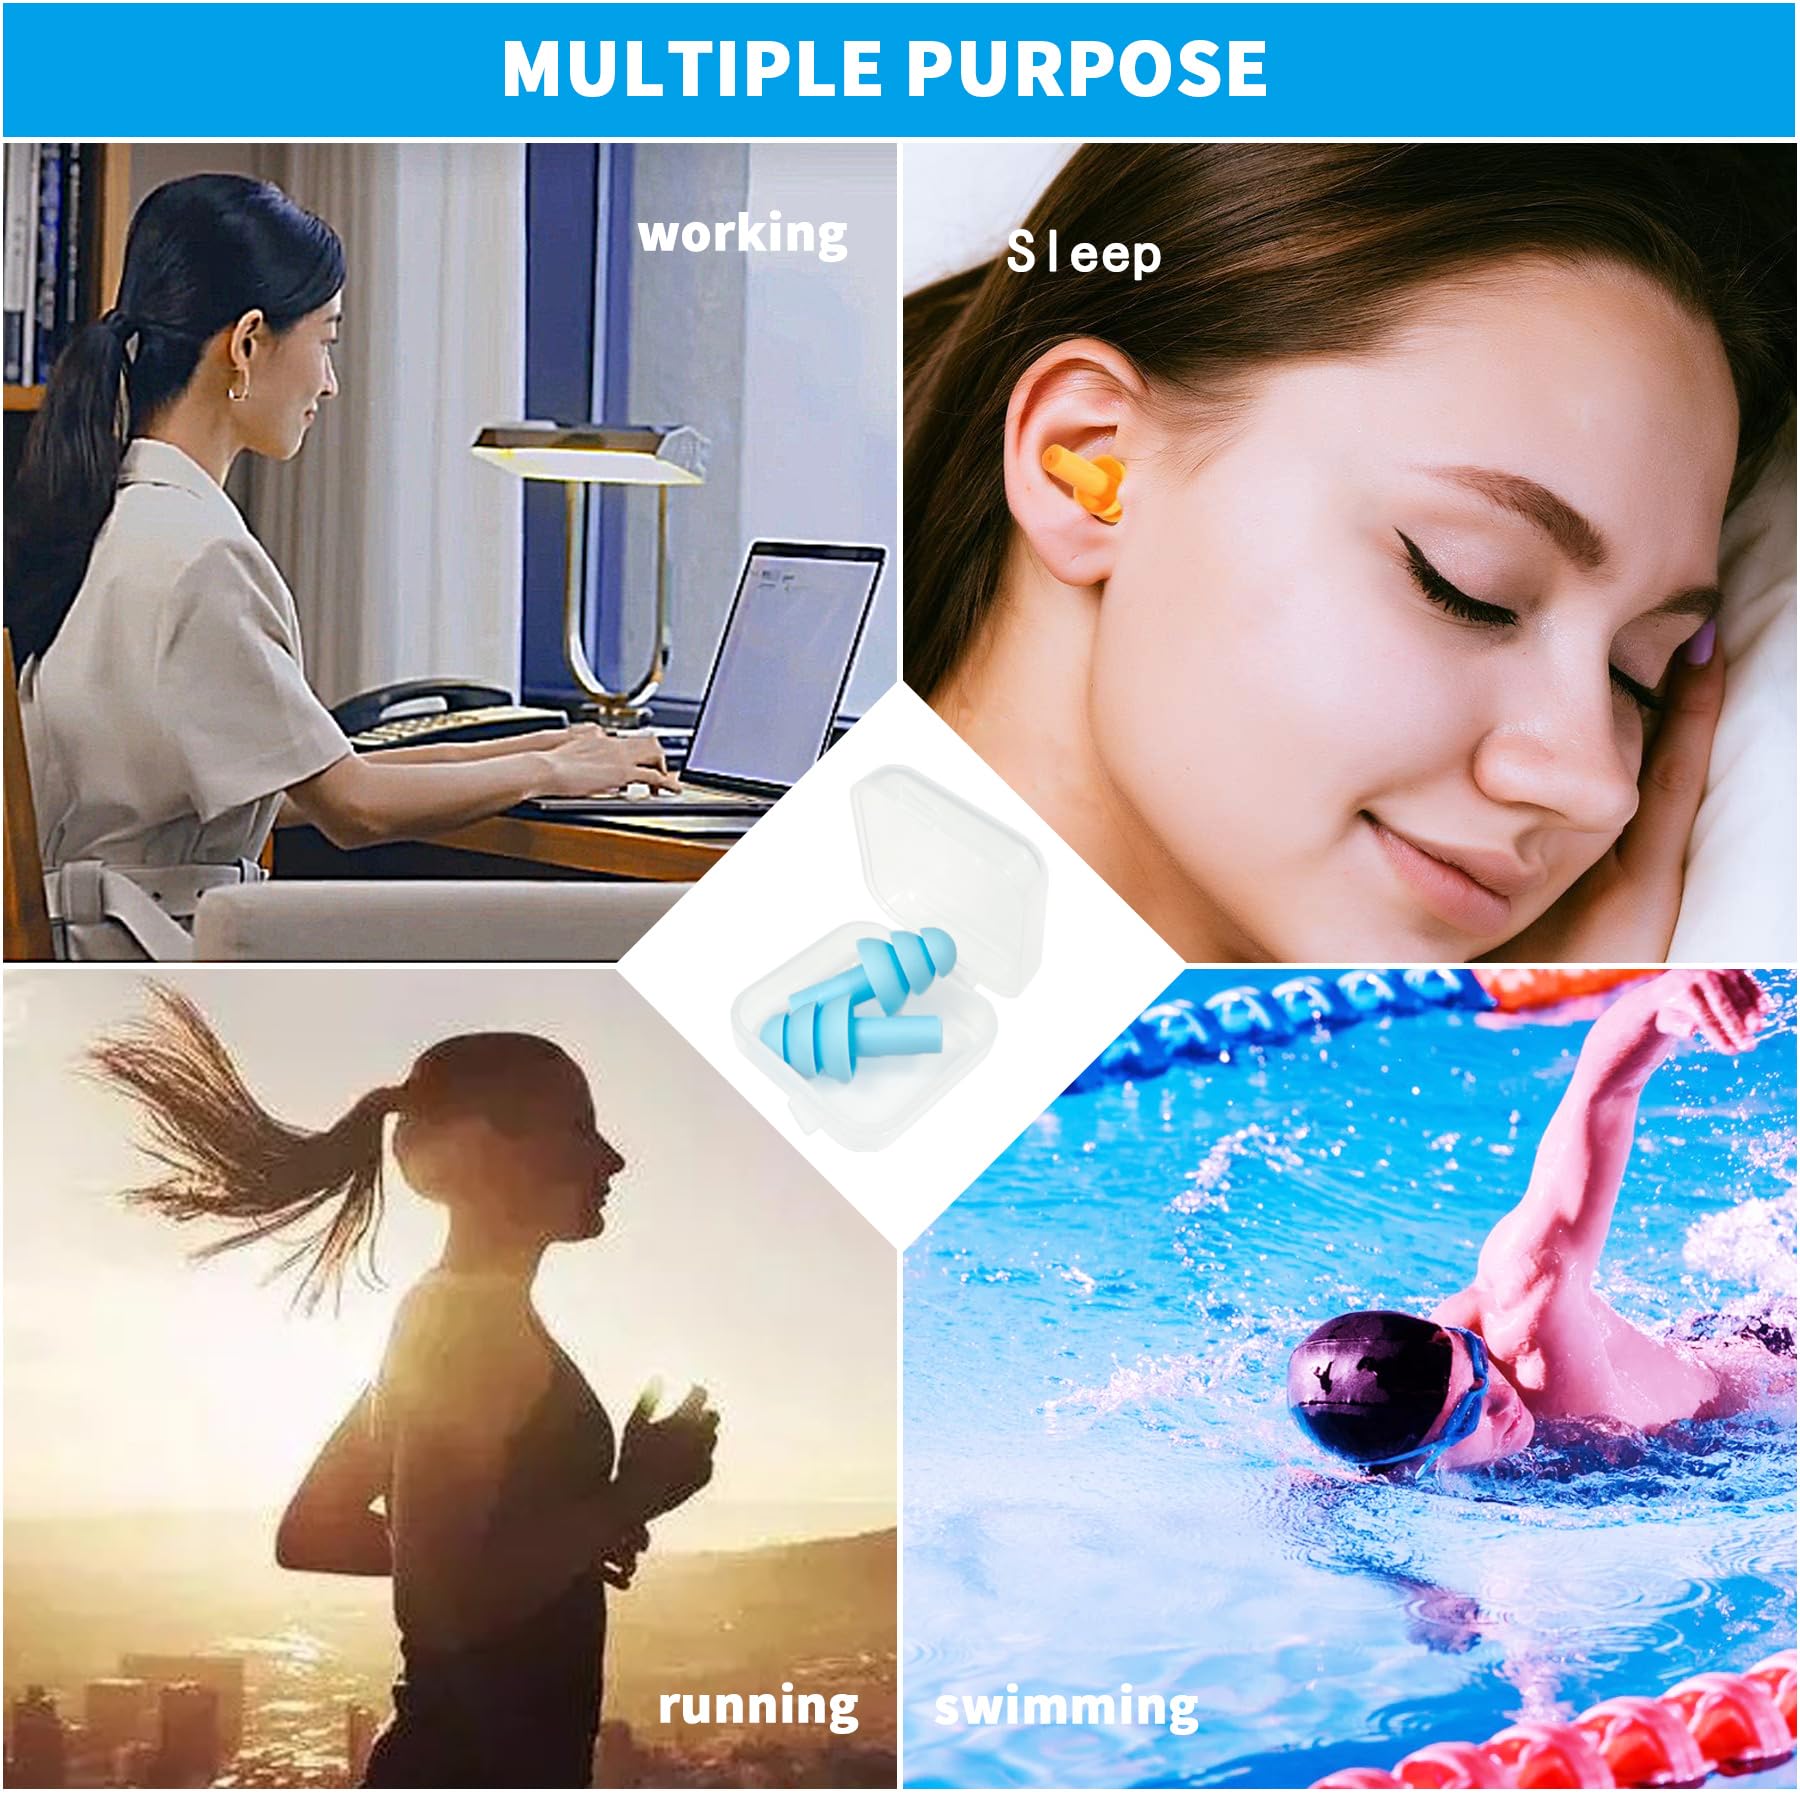 8 Pairs Earplugs for Sleeping Noise Cancelling, Reusable Ear Plugs Soft, Silicone Ear Plug, for Sleeping, Swimming, Snoring, Concerts, Work, Noisy Places (4 Colors))